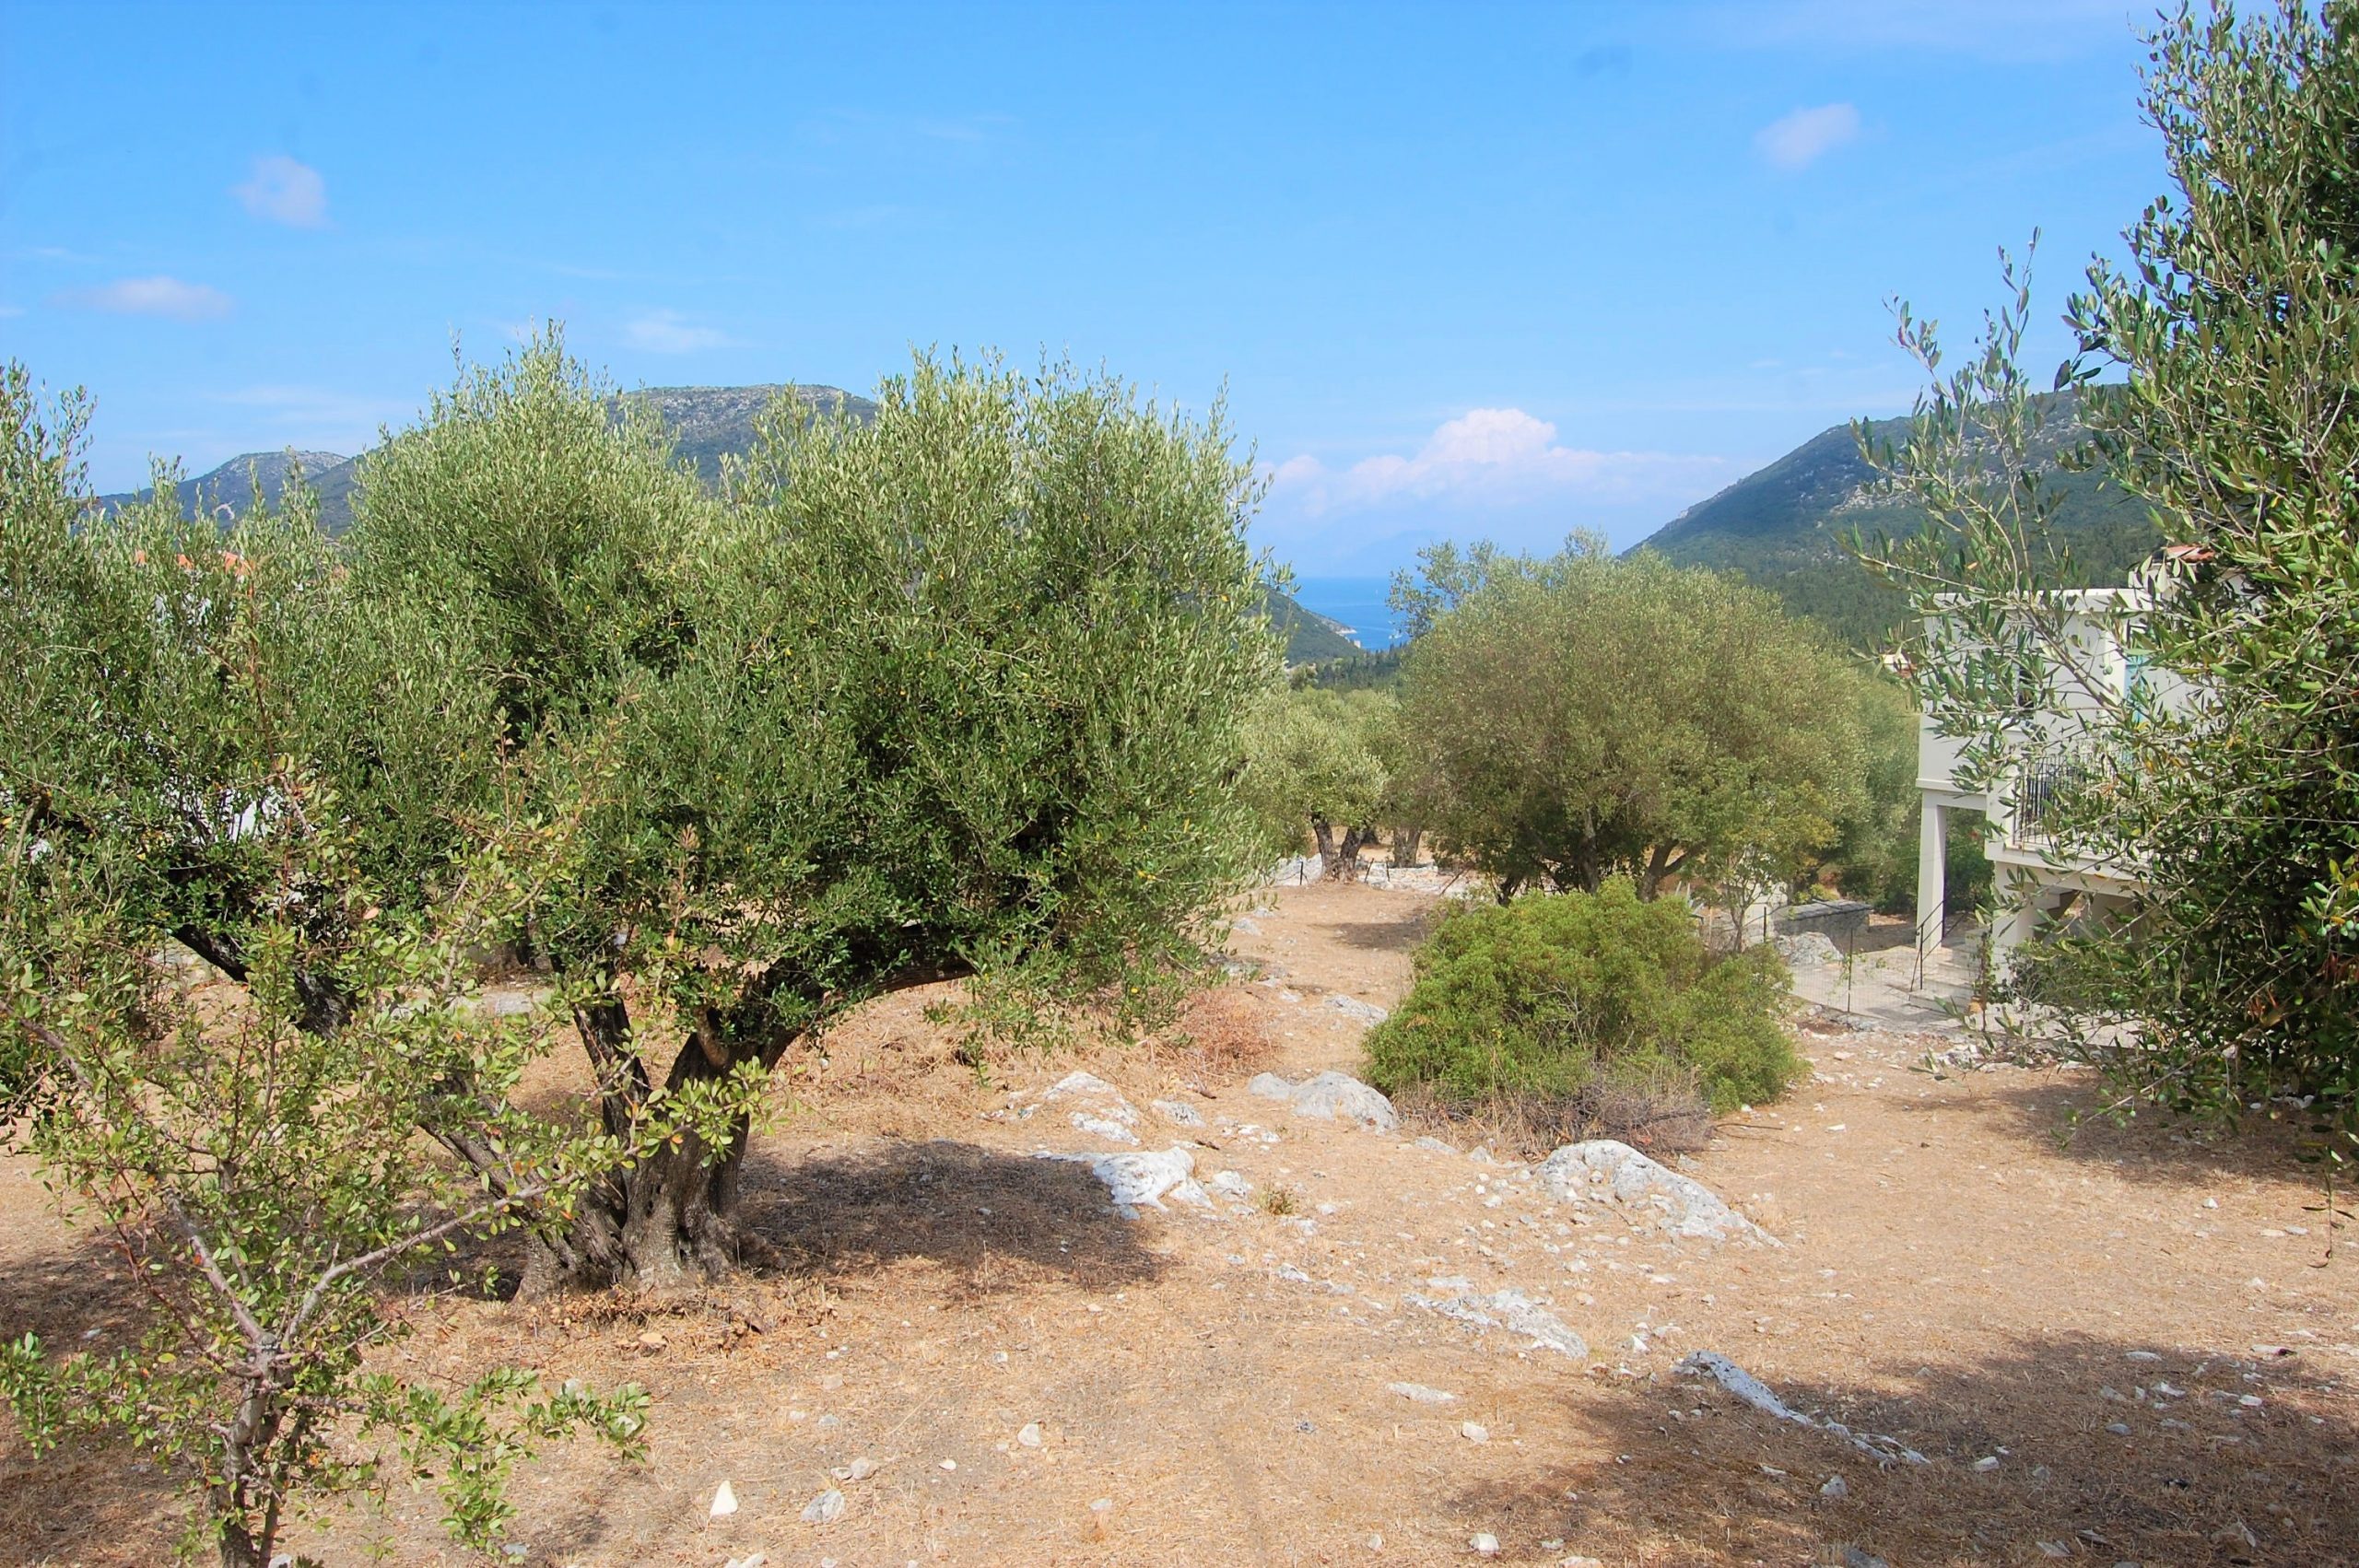 Landscape and terrain of land for sale Ithaca Greece, Stavros